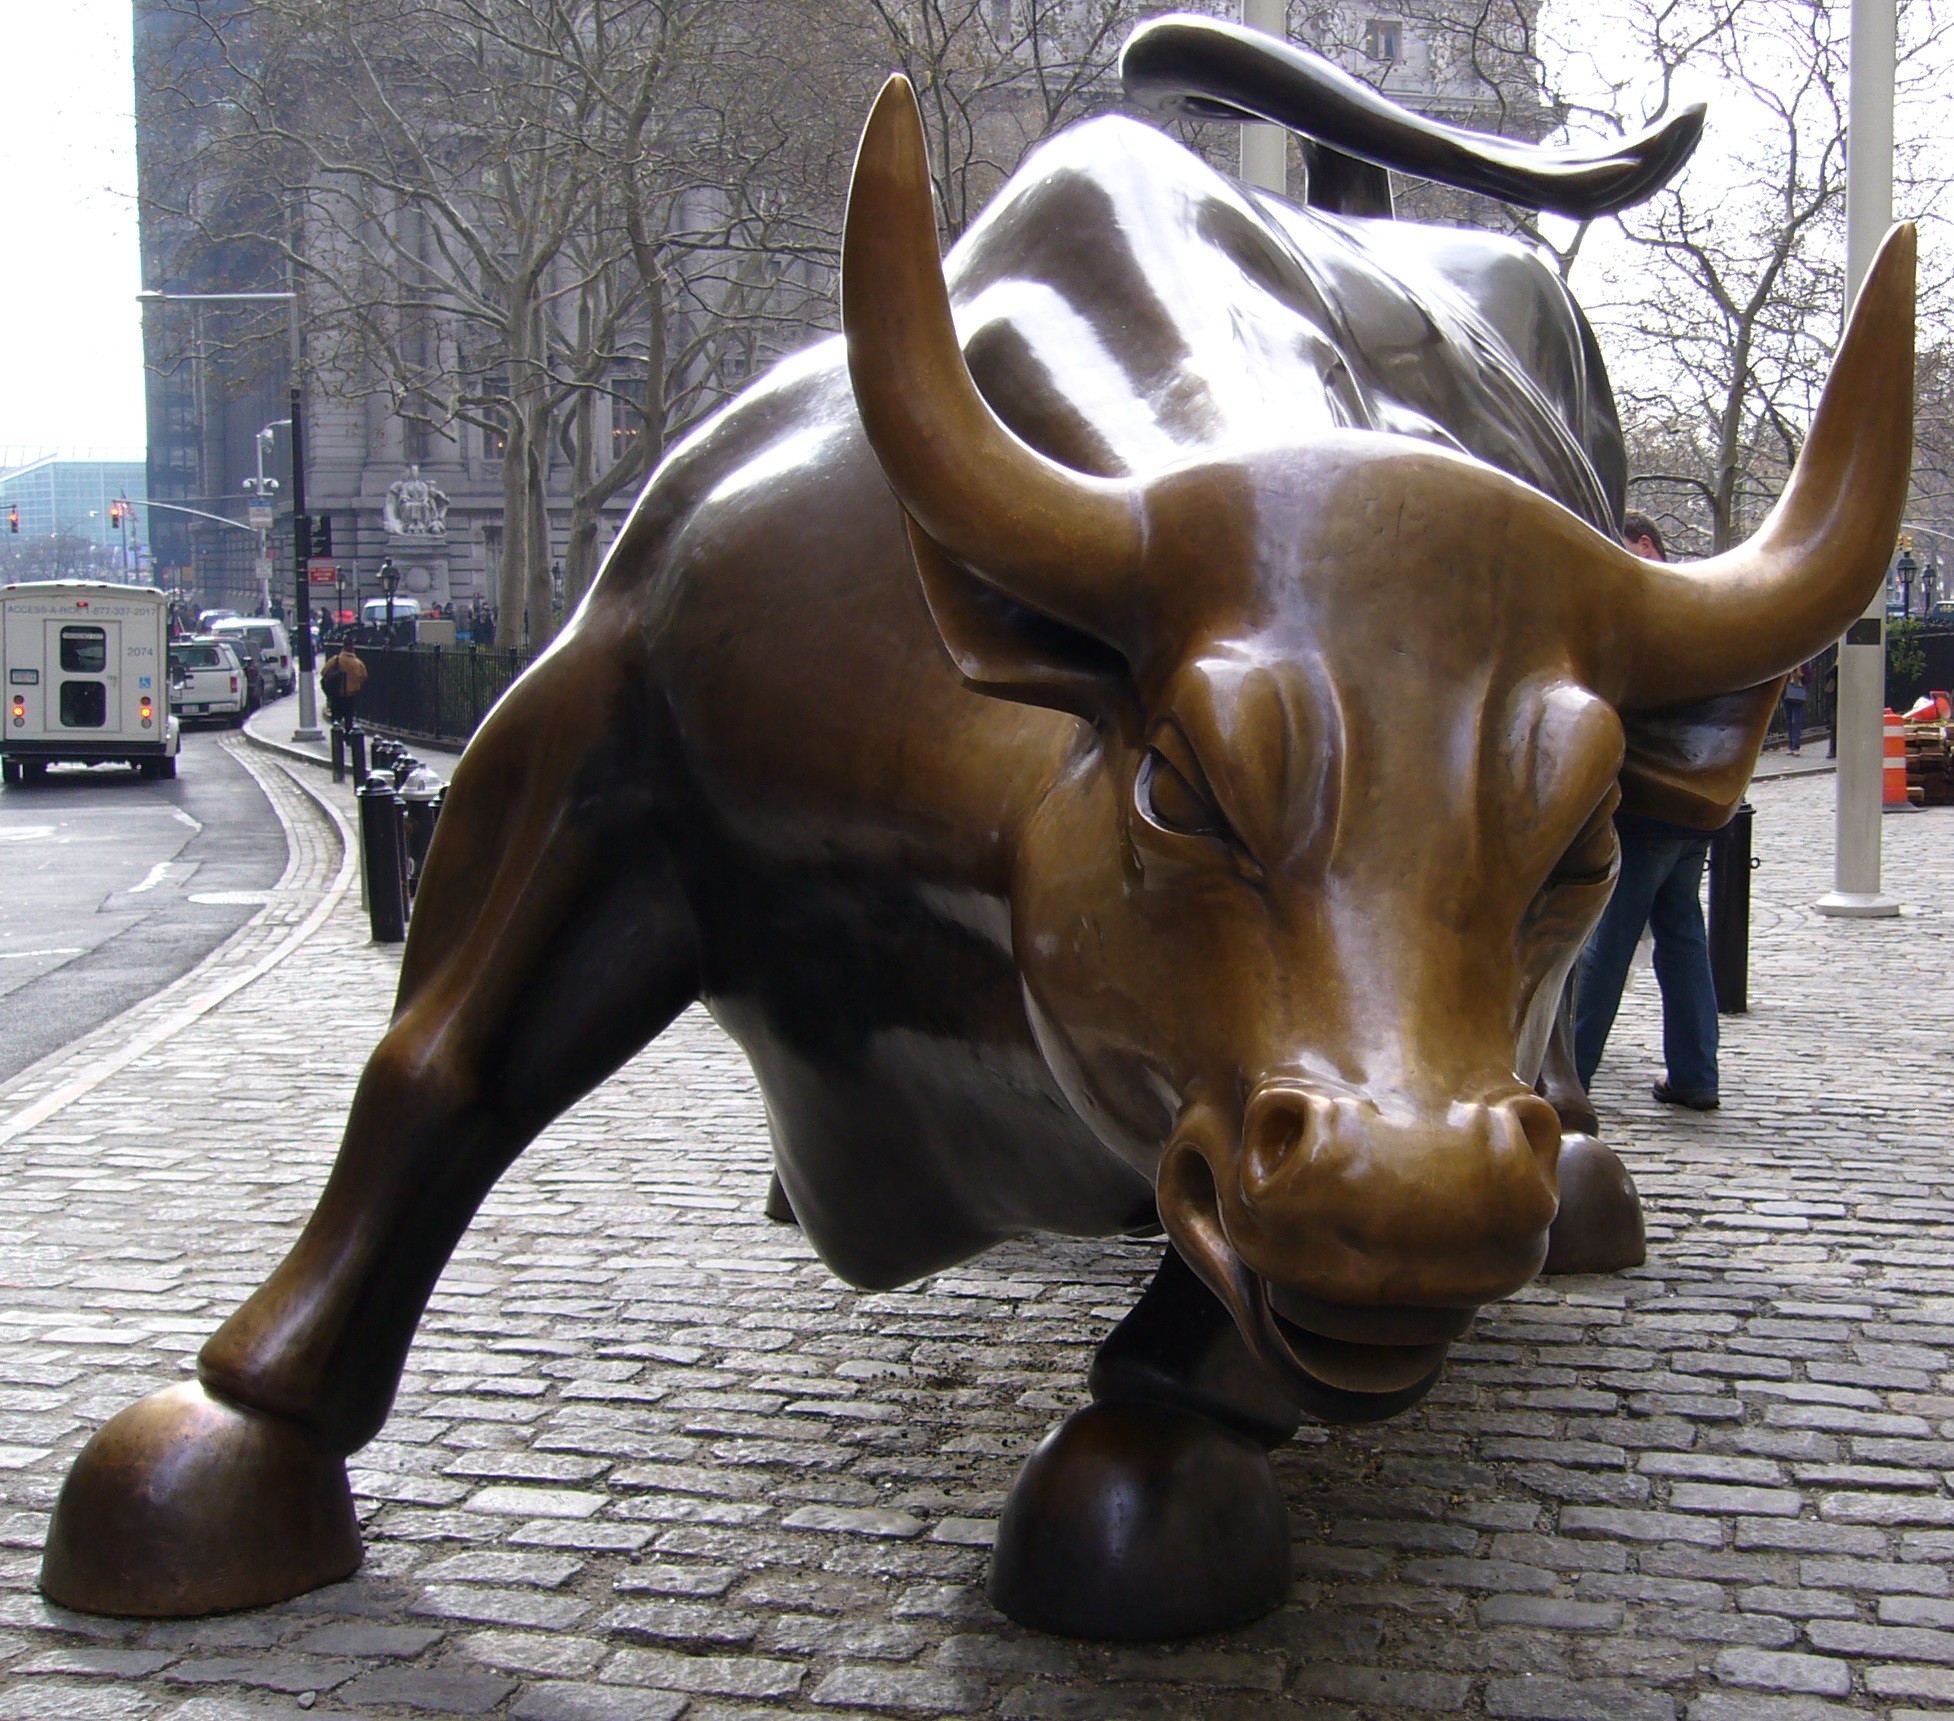 Year 7 Of A Bull Market: Three Key Questions You Should Consider